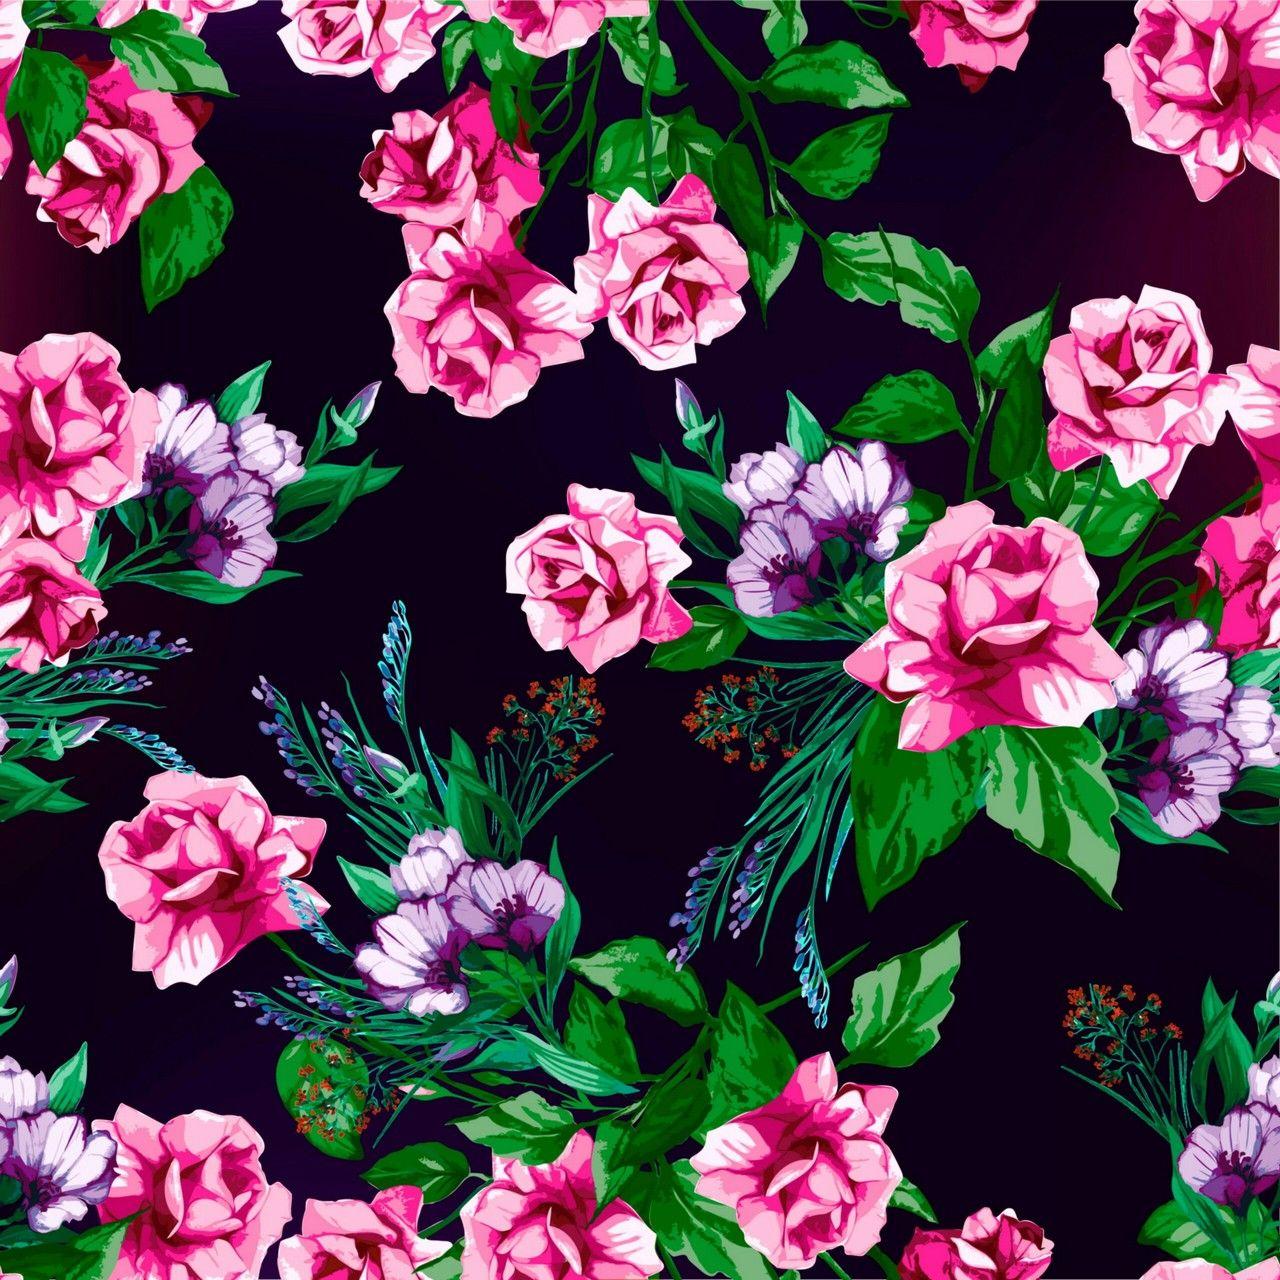 Floral Backgrounds HD - Wallpaper Cave